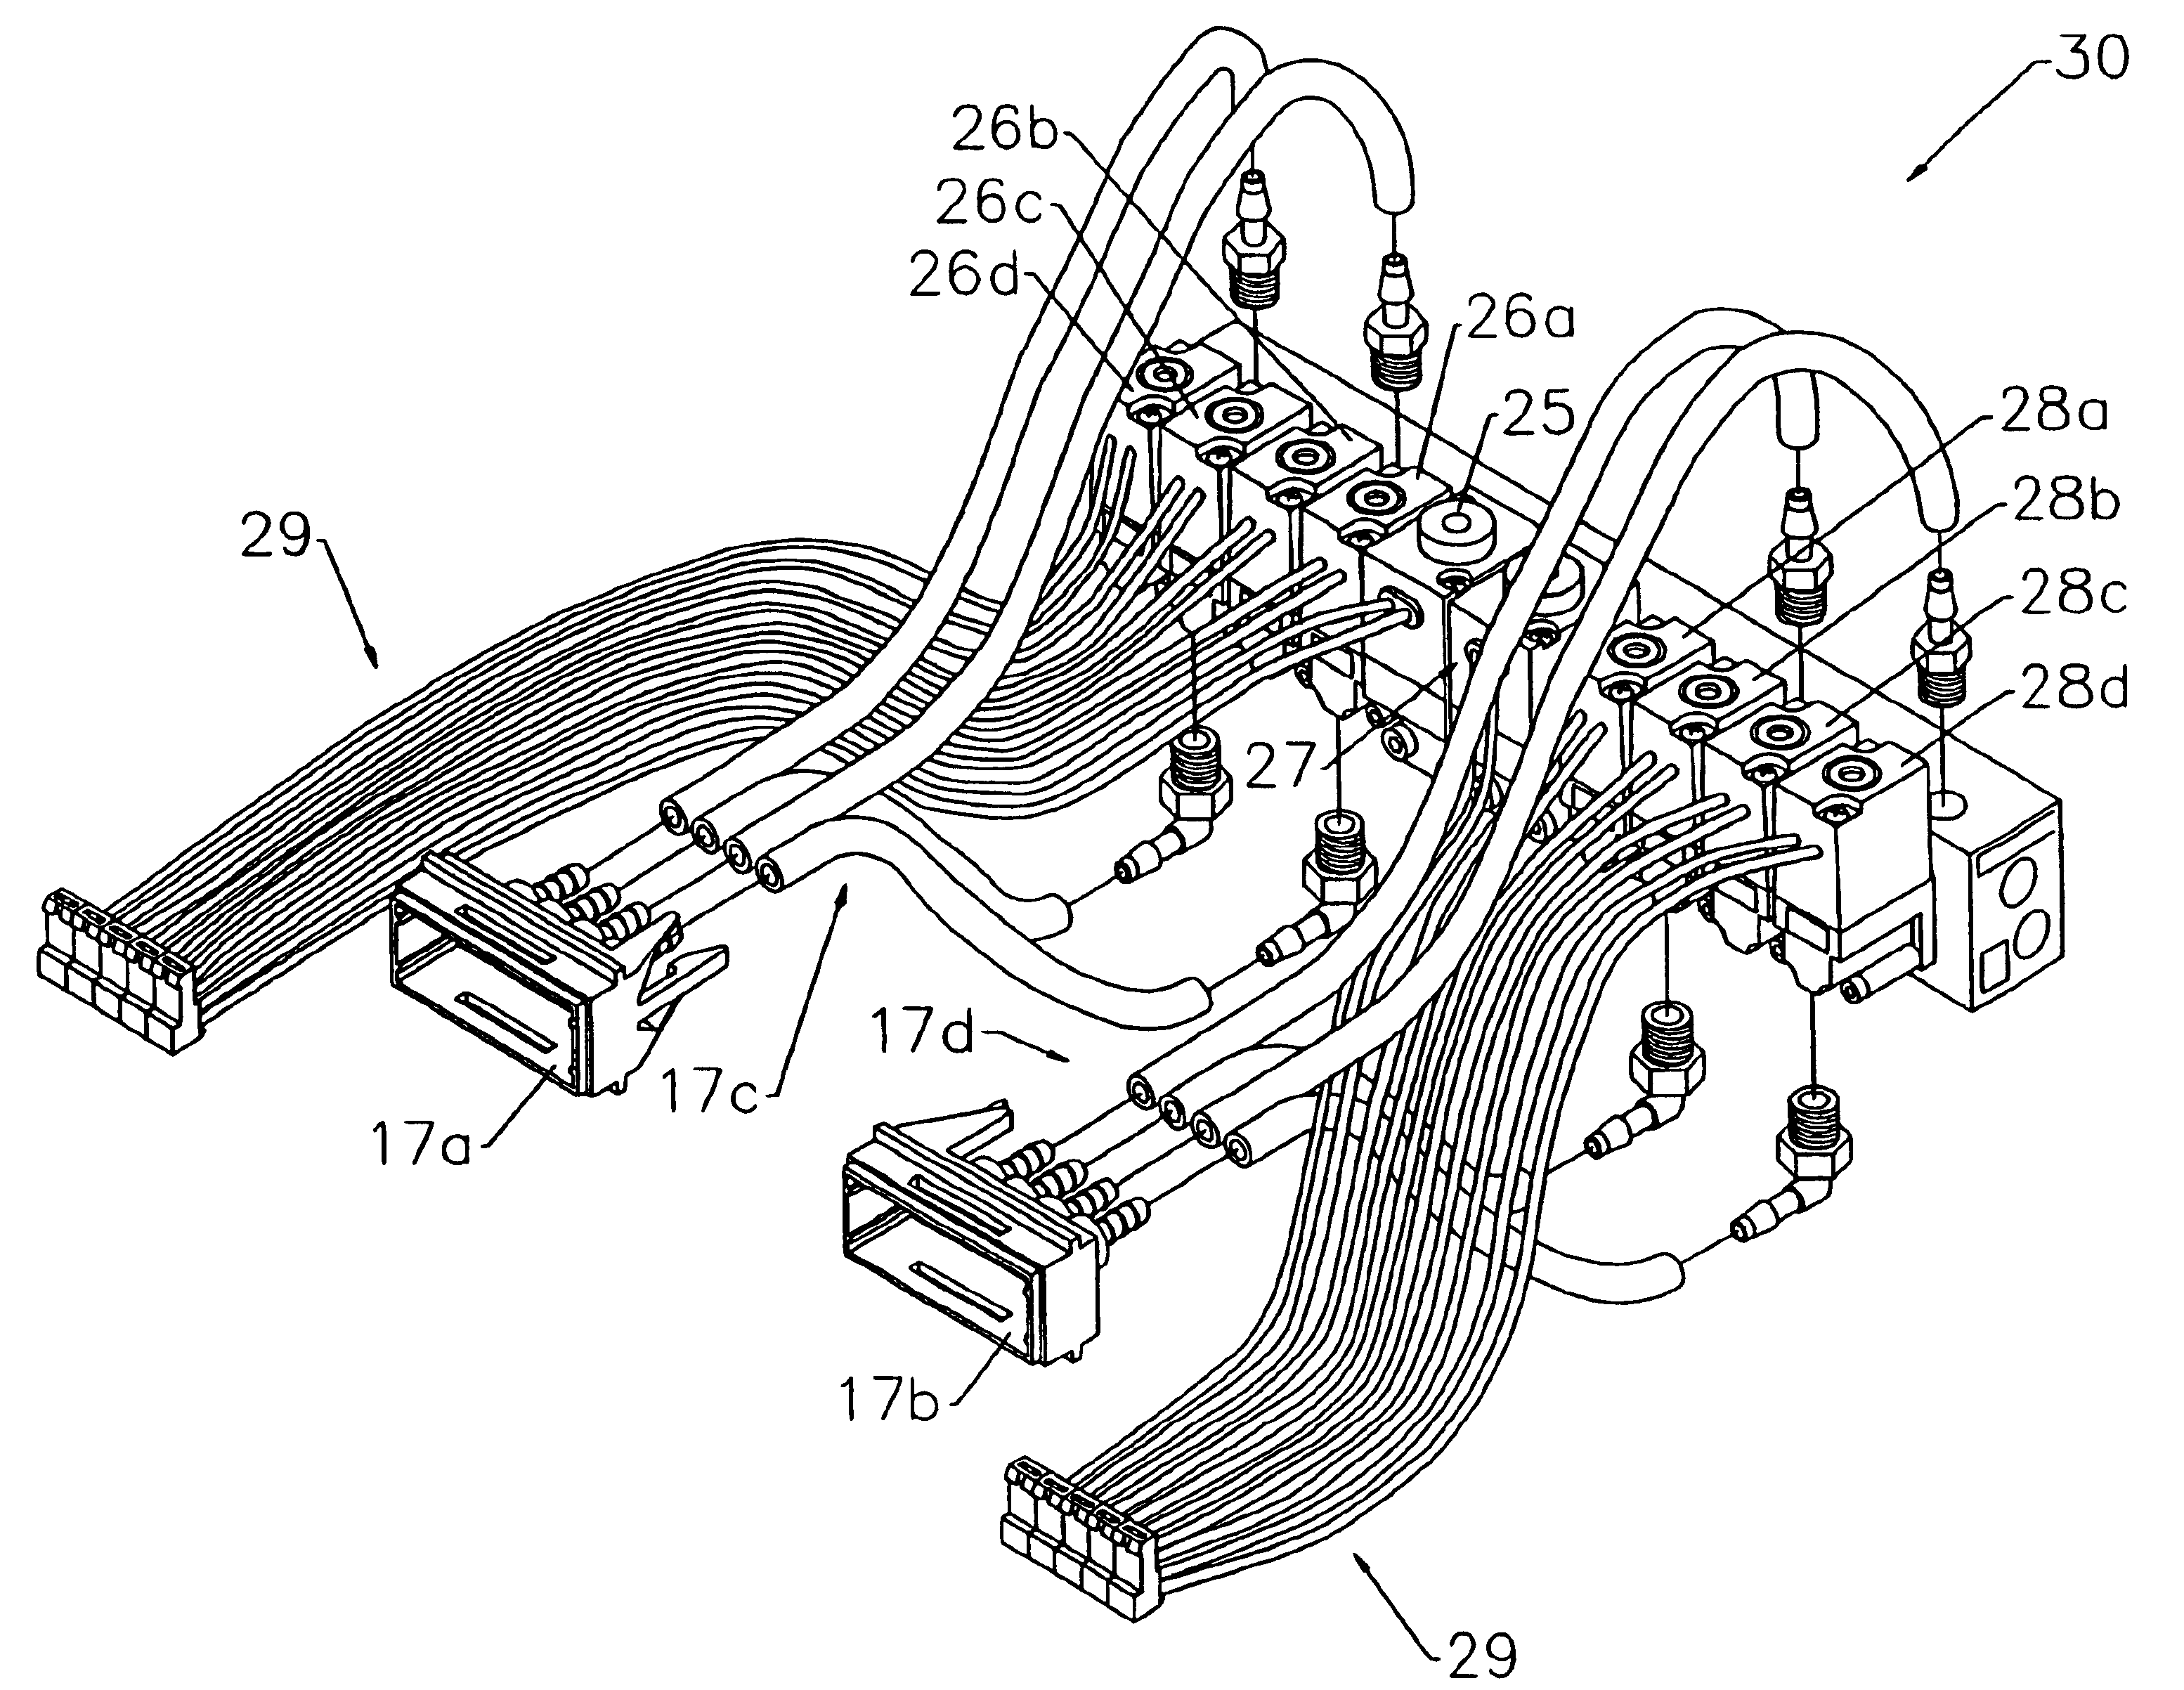 Universal connecting device that designates an operational mode